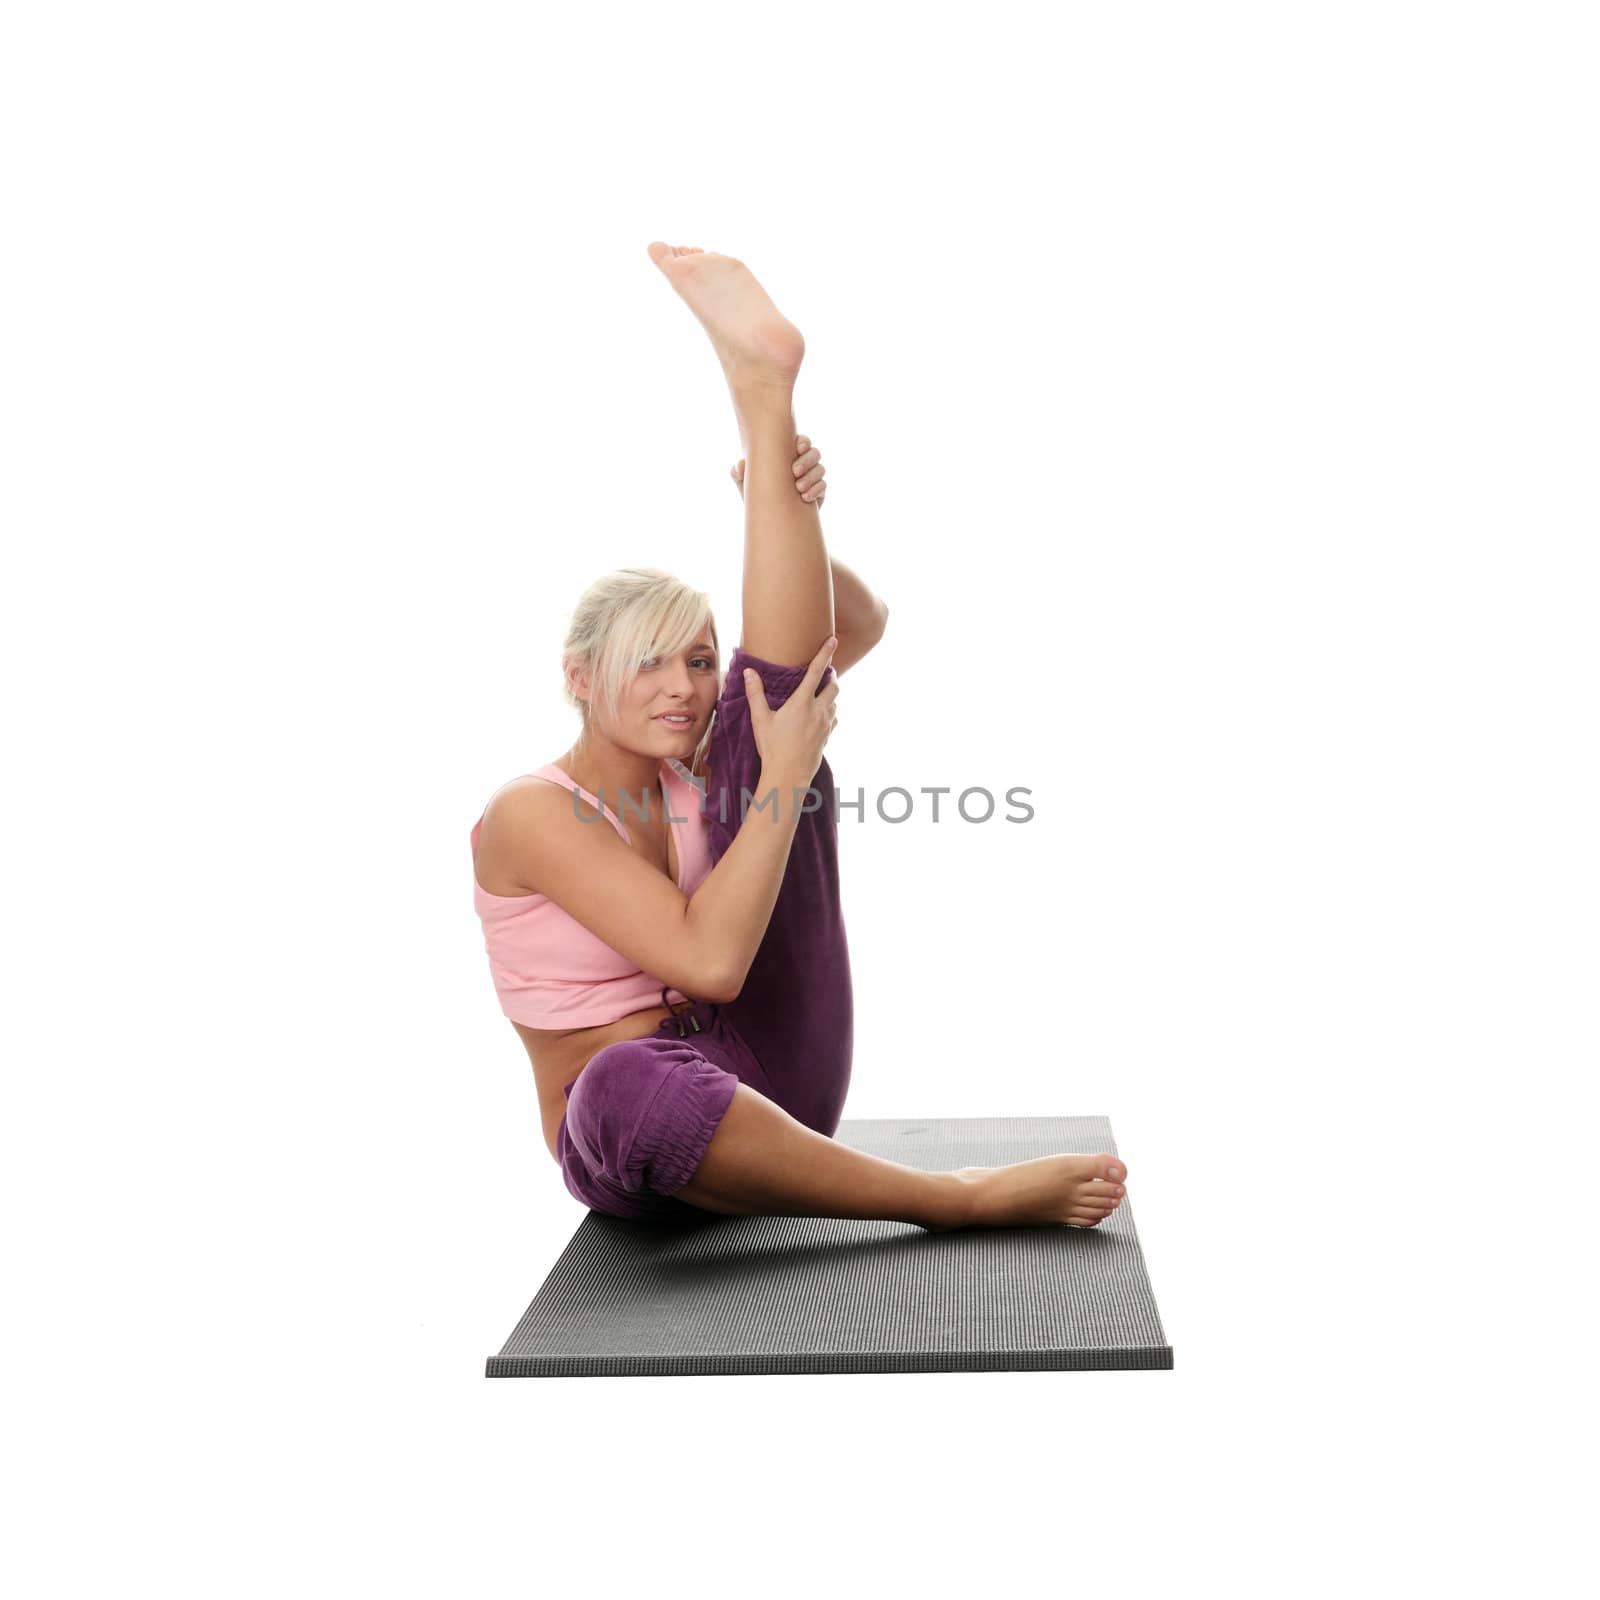 Young woman exercising isolated on white background